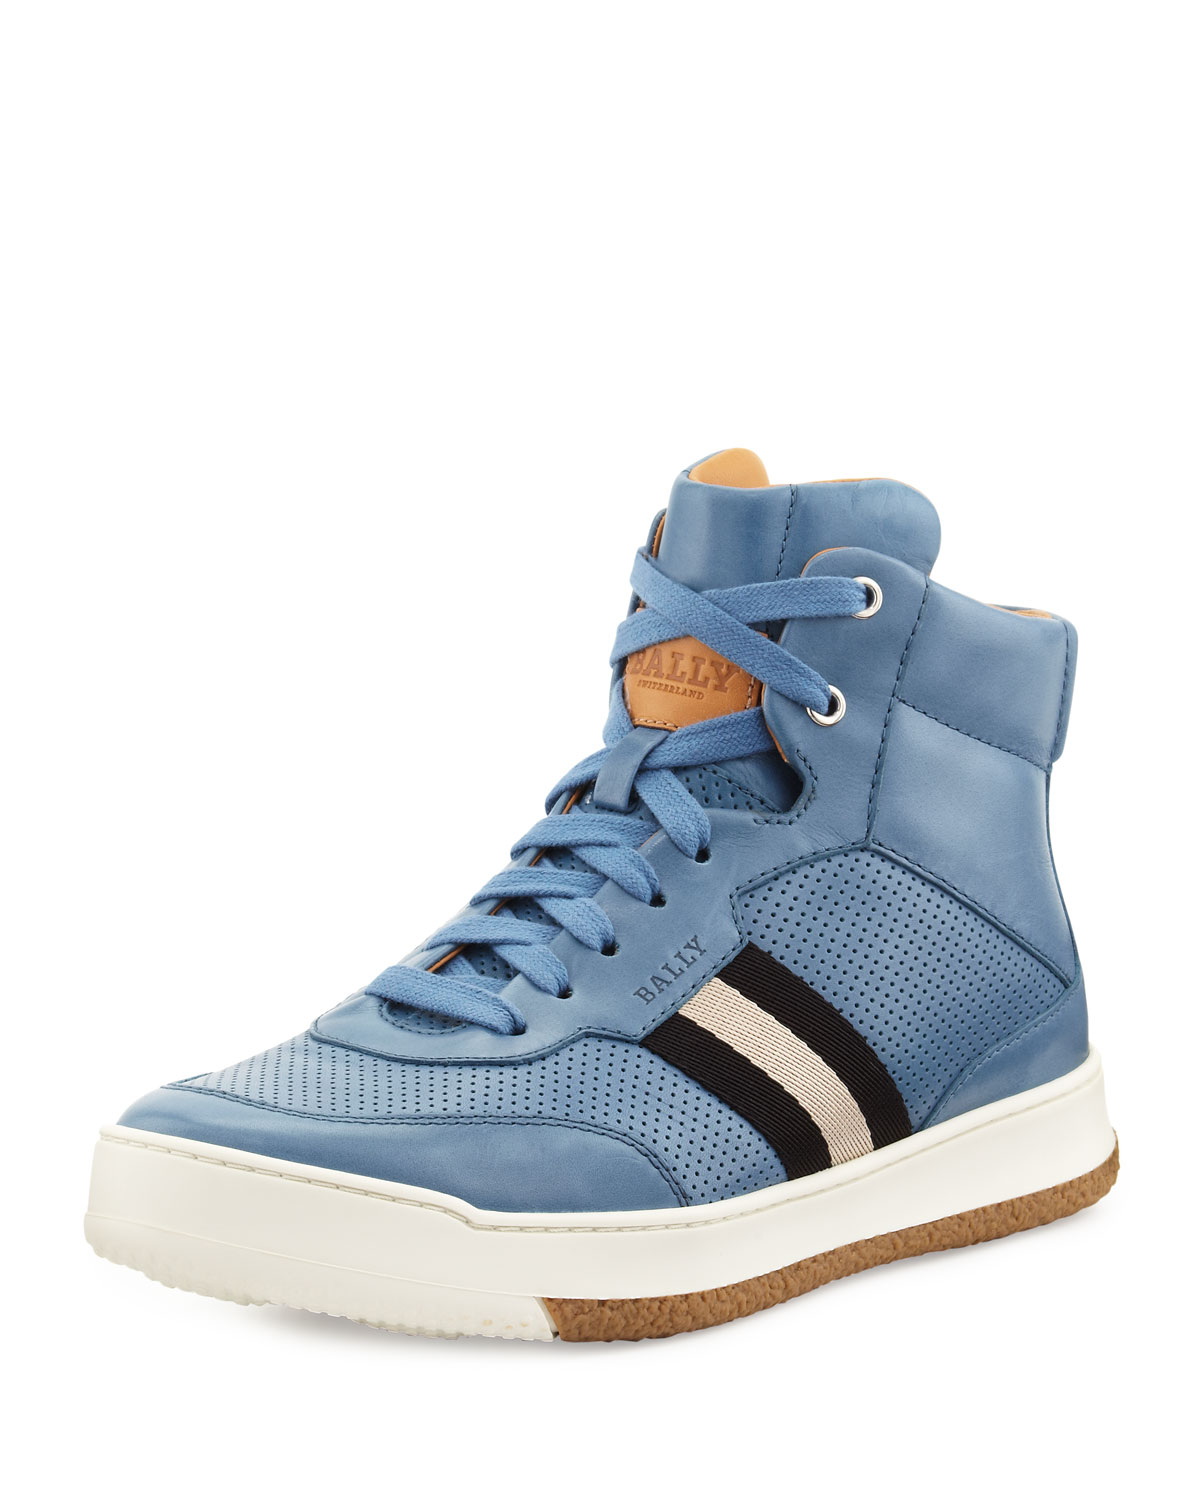 Lyst - Bally Leather Web-Detail High-Top Sneaker in Blue for Men